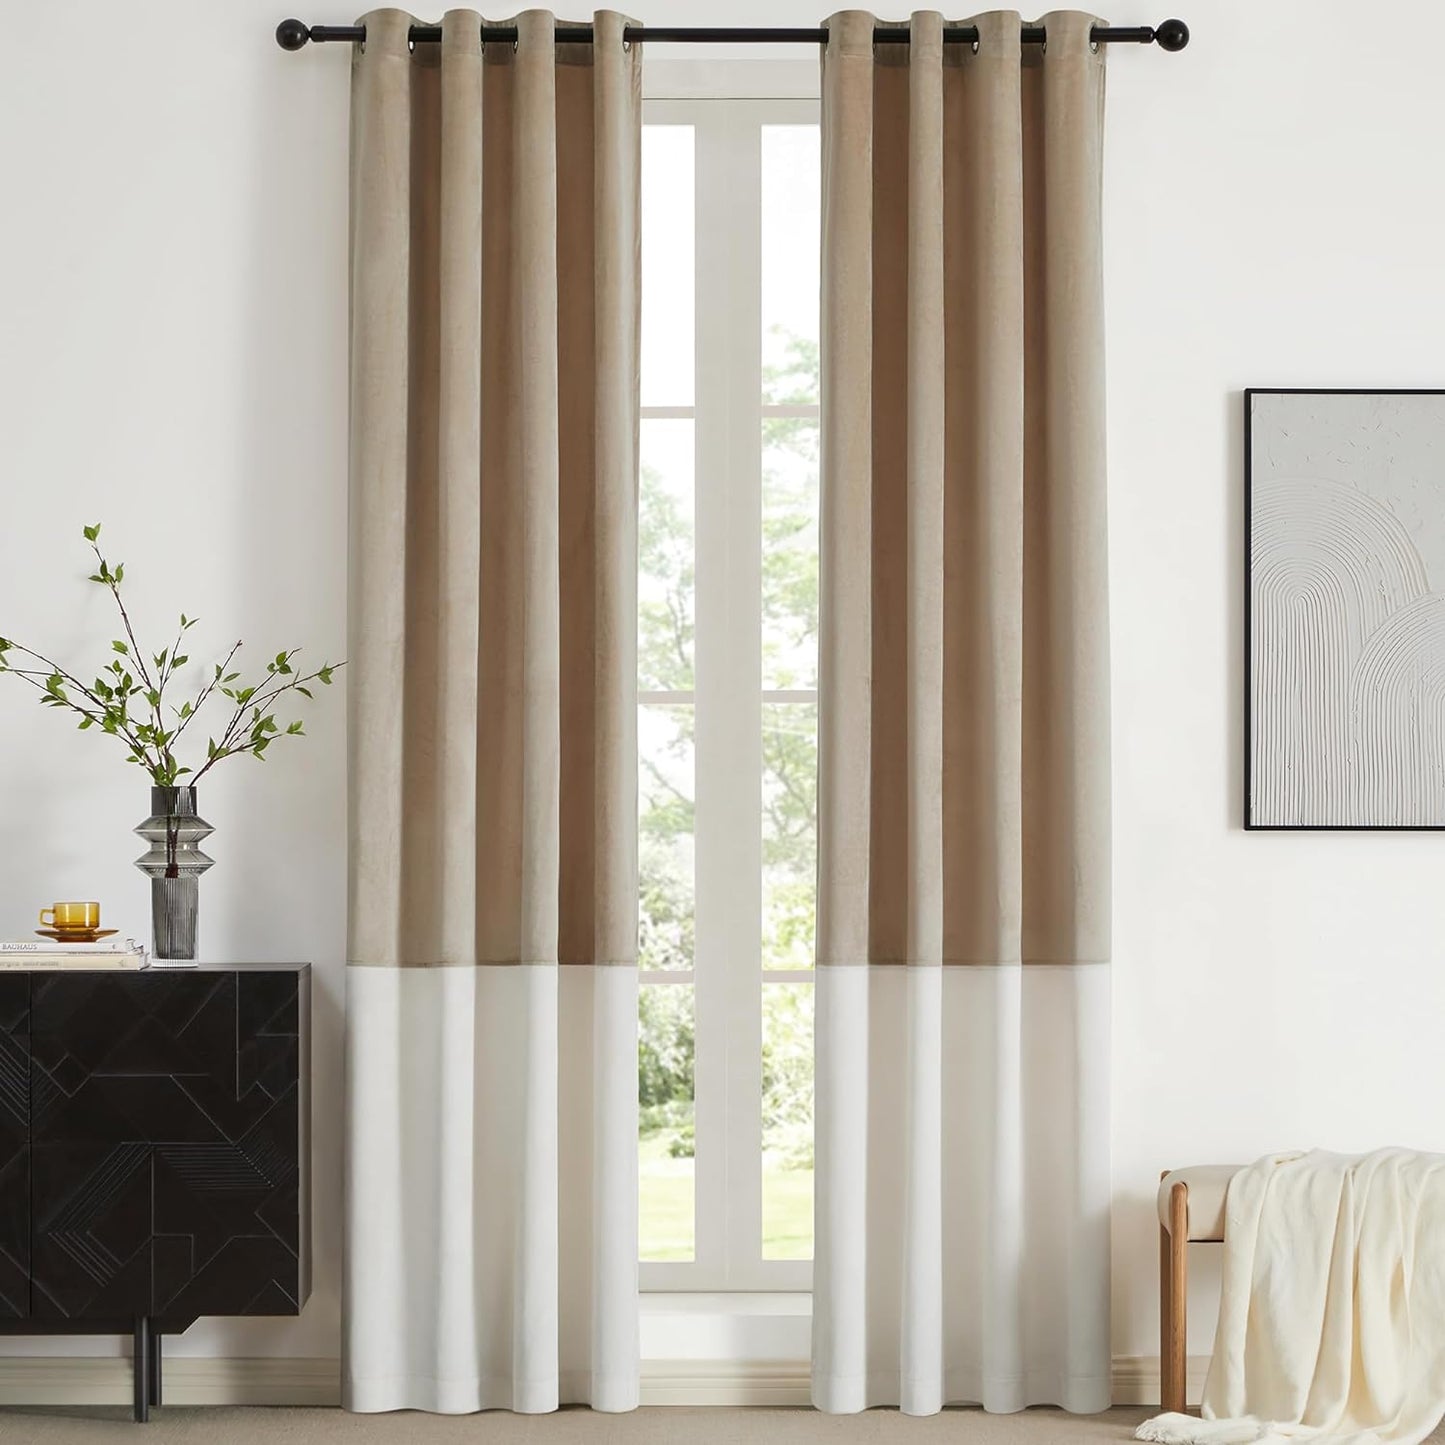 BULBUL Color Block Window Curtains Panels 84 Inches Long Cream Ivory Gold Velvet Farmhouse Drapes for Bedroom Living Room Darkening Treatment with Grommet Set of 2  BULBUL Champagne  Cream 52"W X 84"L 